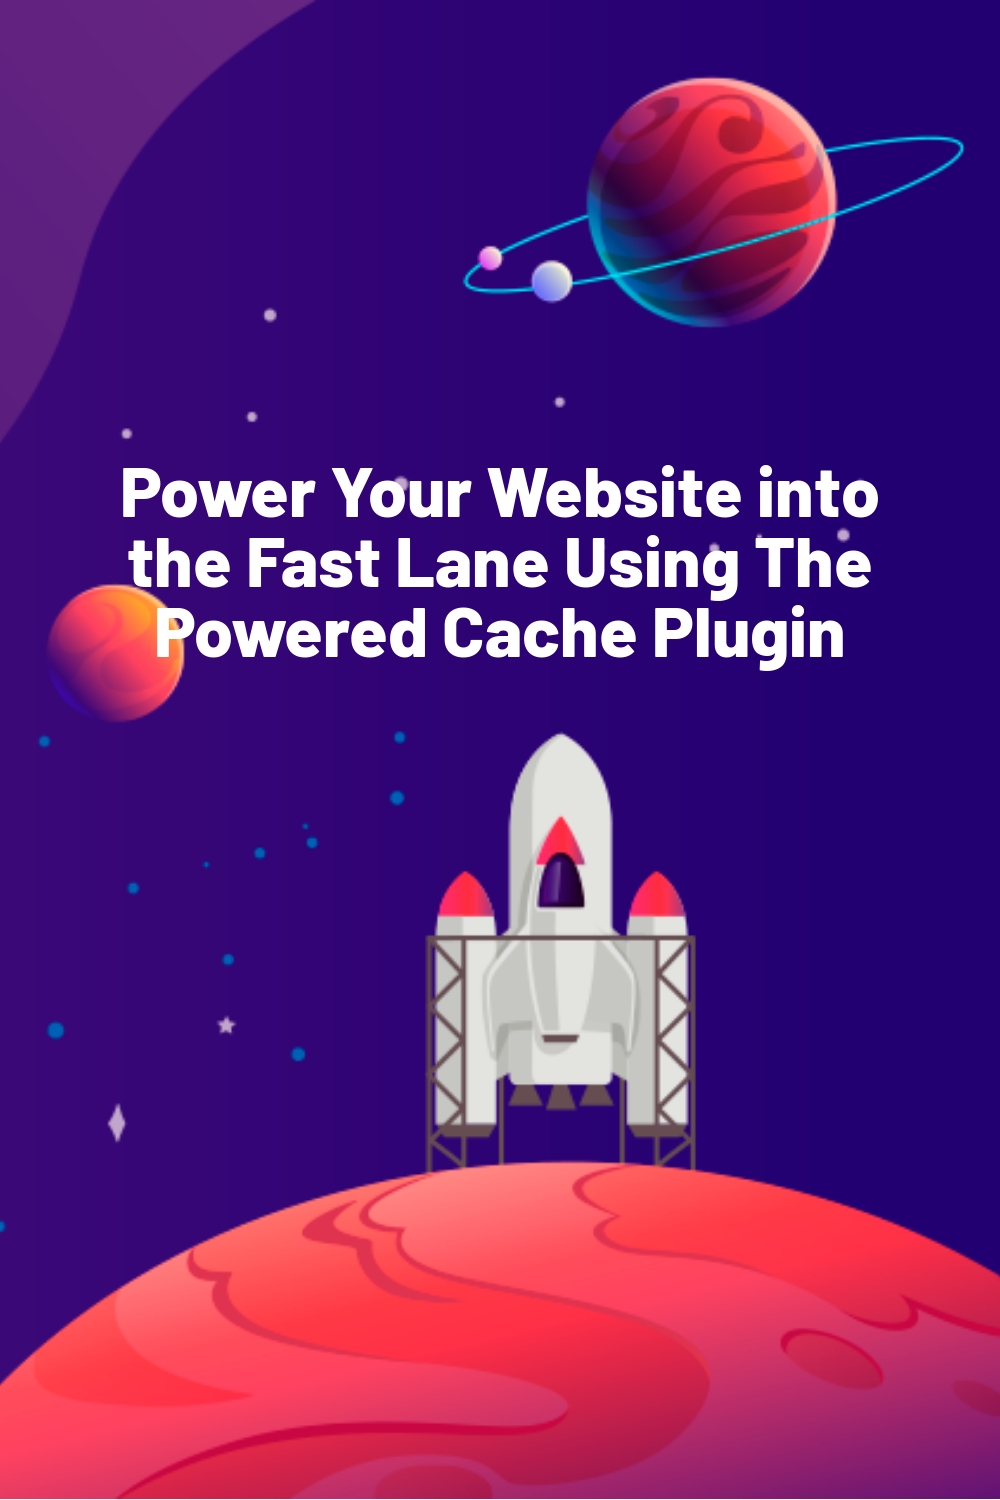 Power Your Website into the Fast Lane Using The Powered Cache Plugin